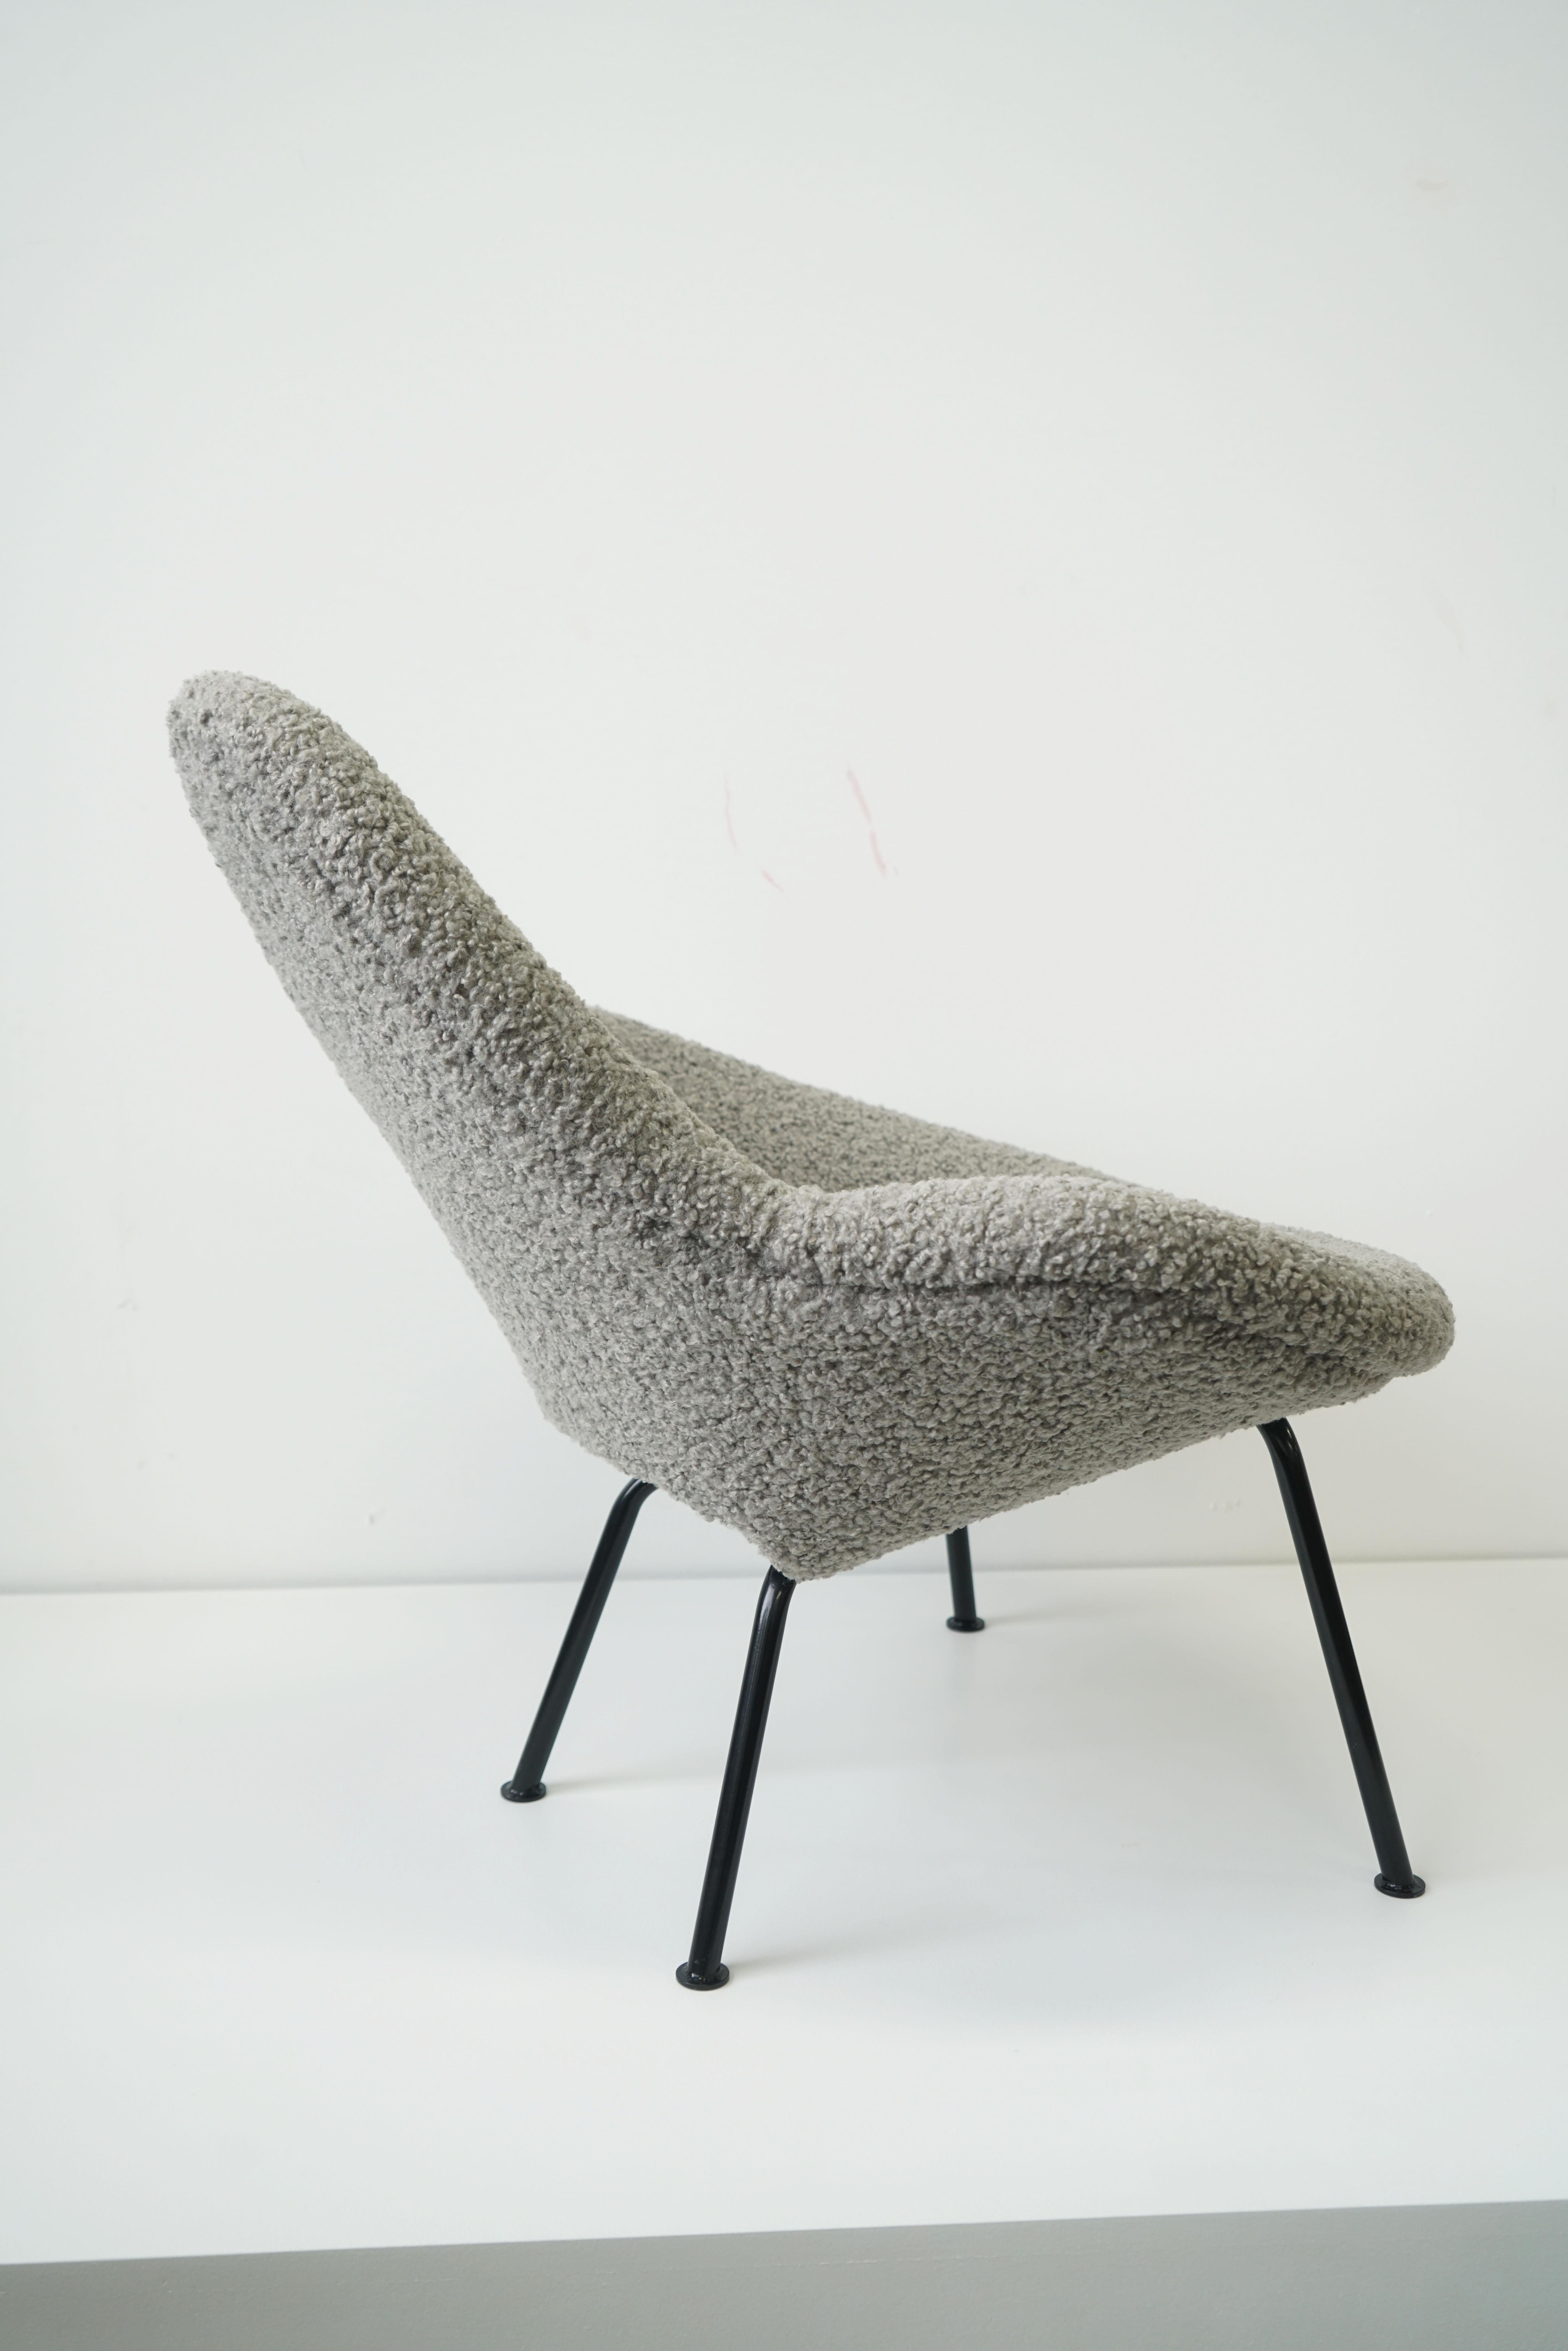 Set of 2 Vintage Grey Bouclé Lounge Chairs, Organic Womb Style Form 9